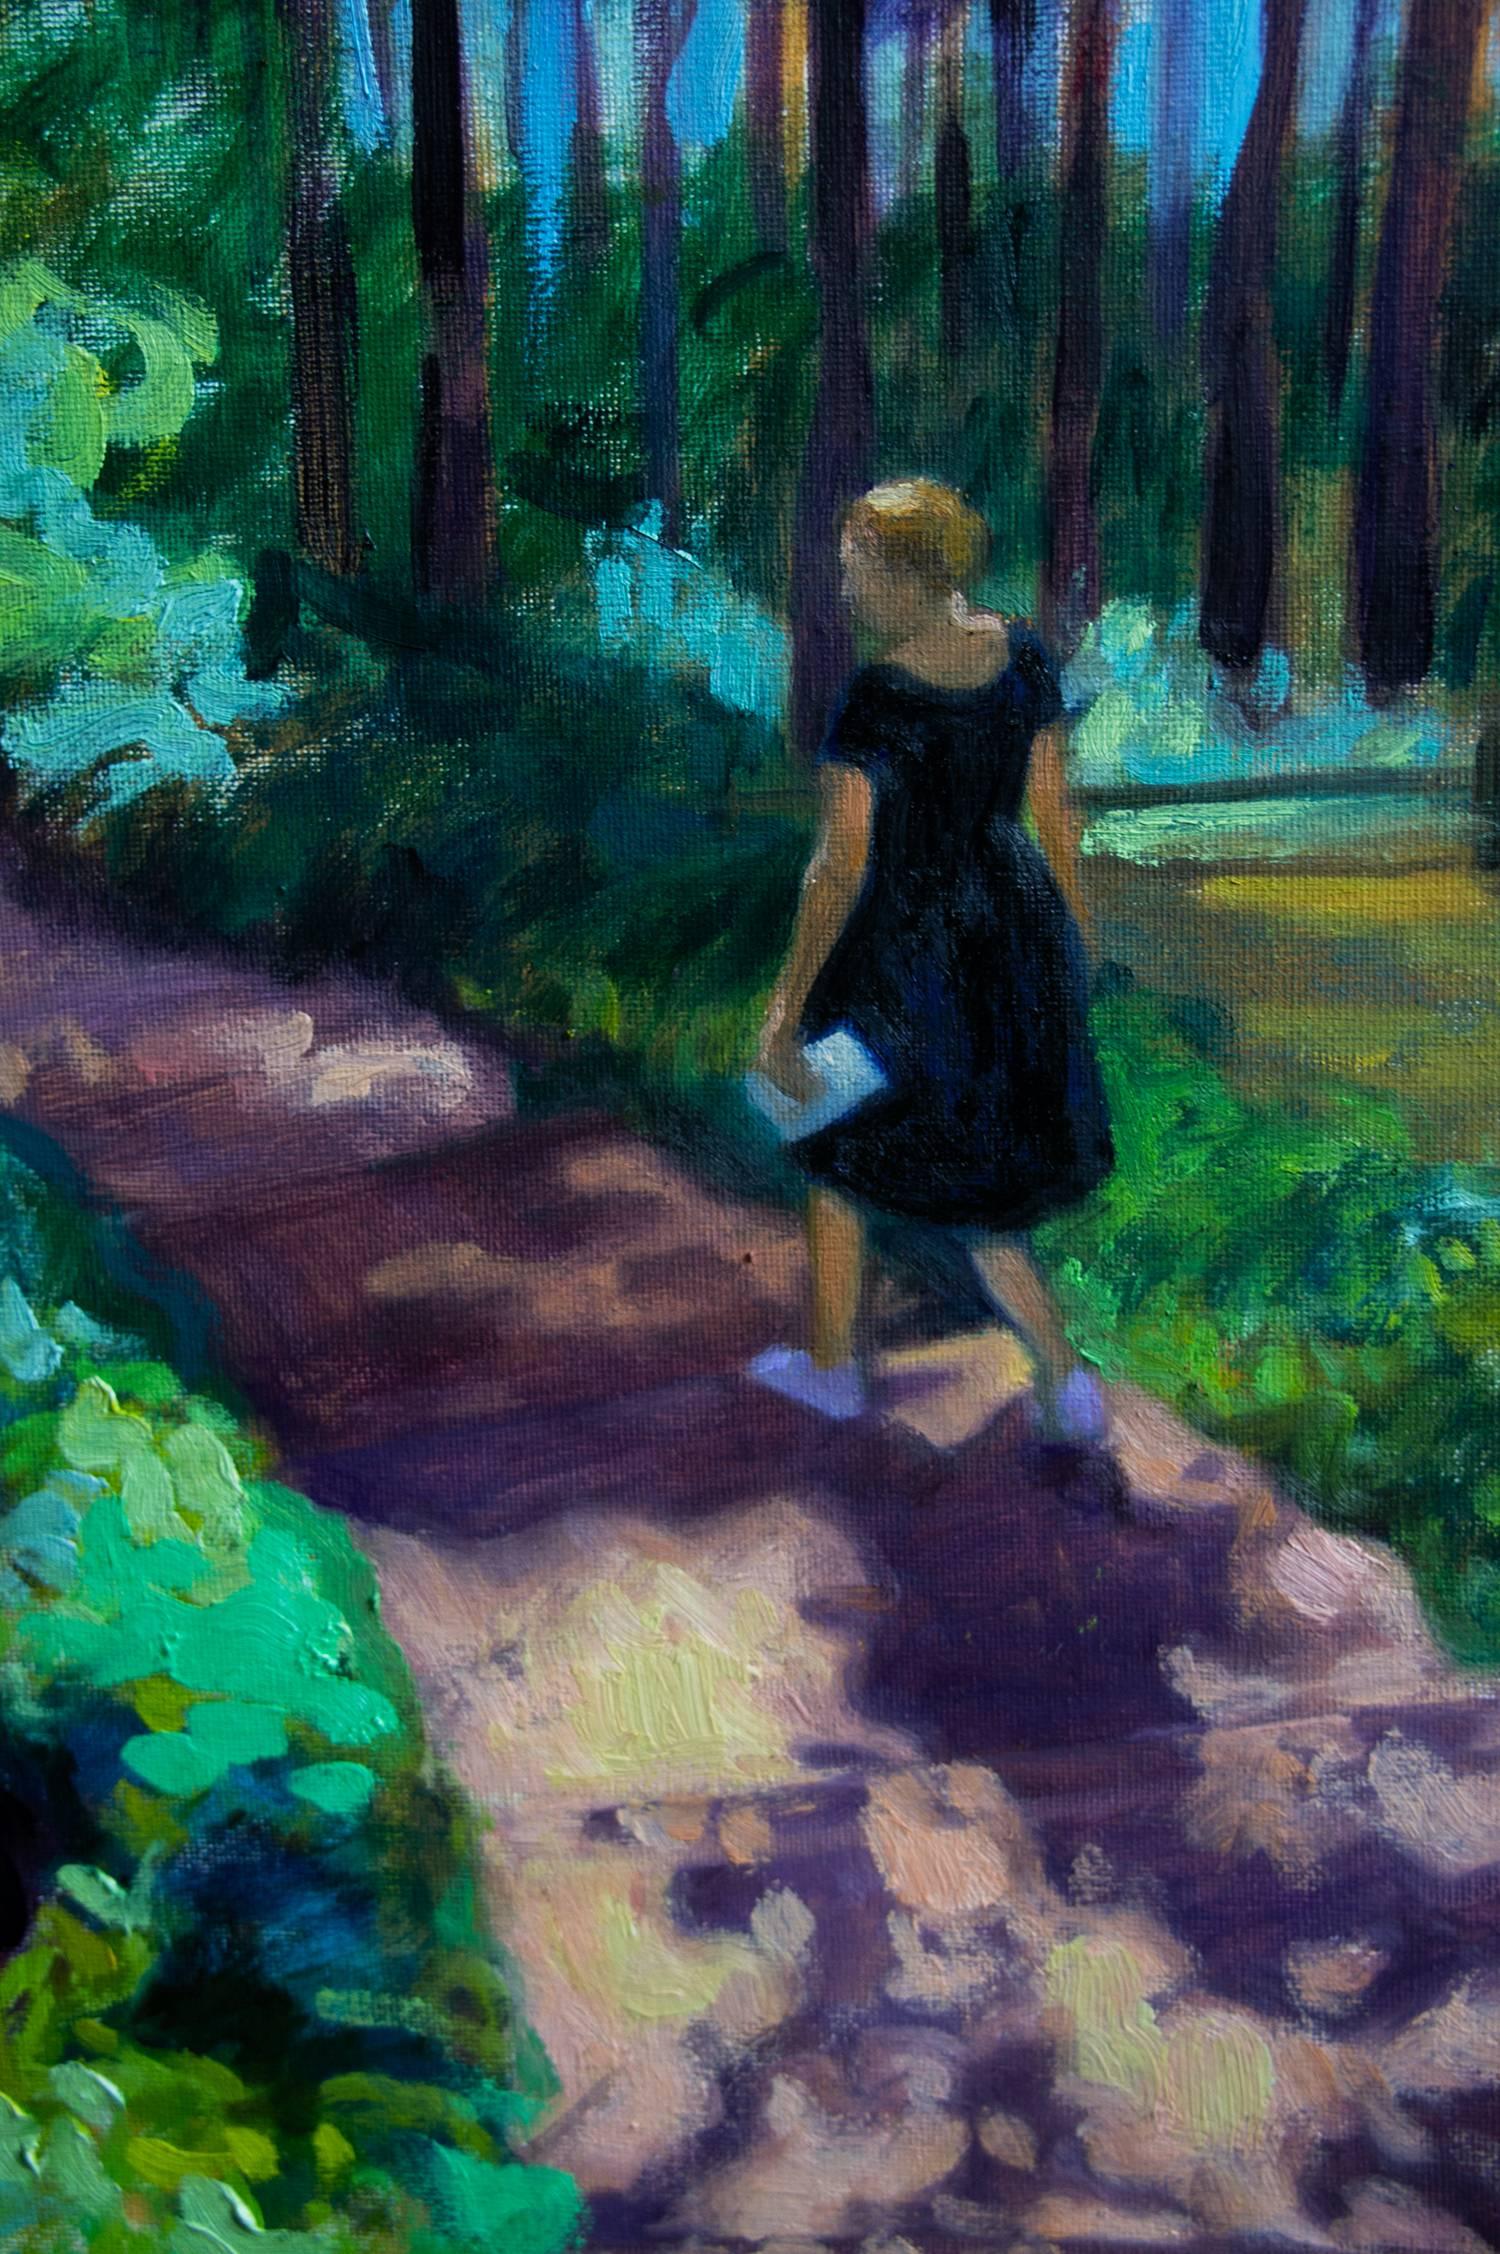 Title: A Walk in the Forest
Artist: Elina Arbidane (emerging contemporary impressionism painter), Latvia
Original hand-painted alla prima painting of forest and a woman in black dress 
Oil paints on canvas
Not a print or copy, only one